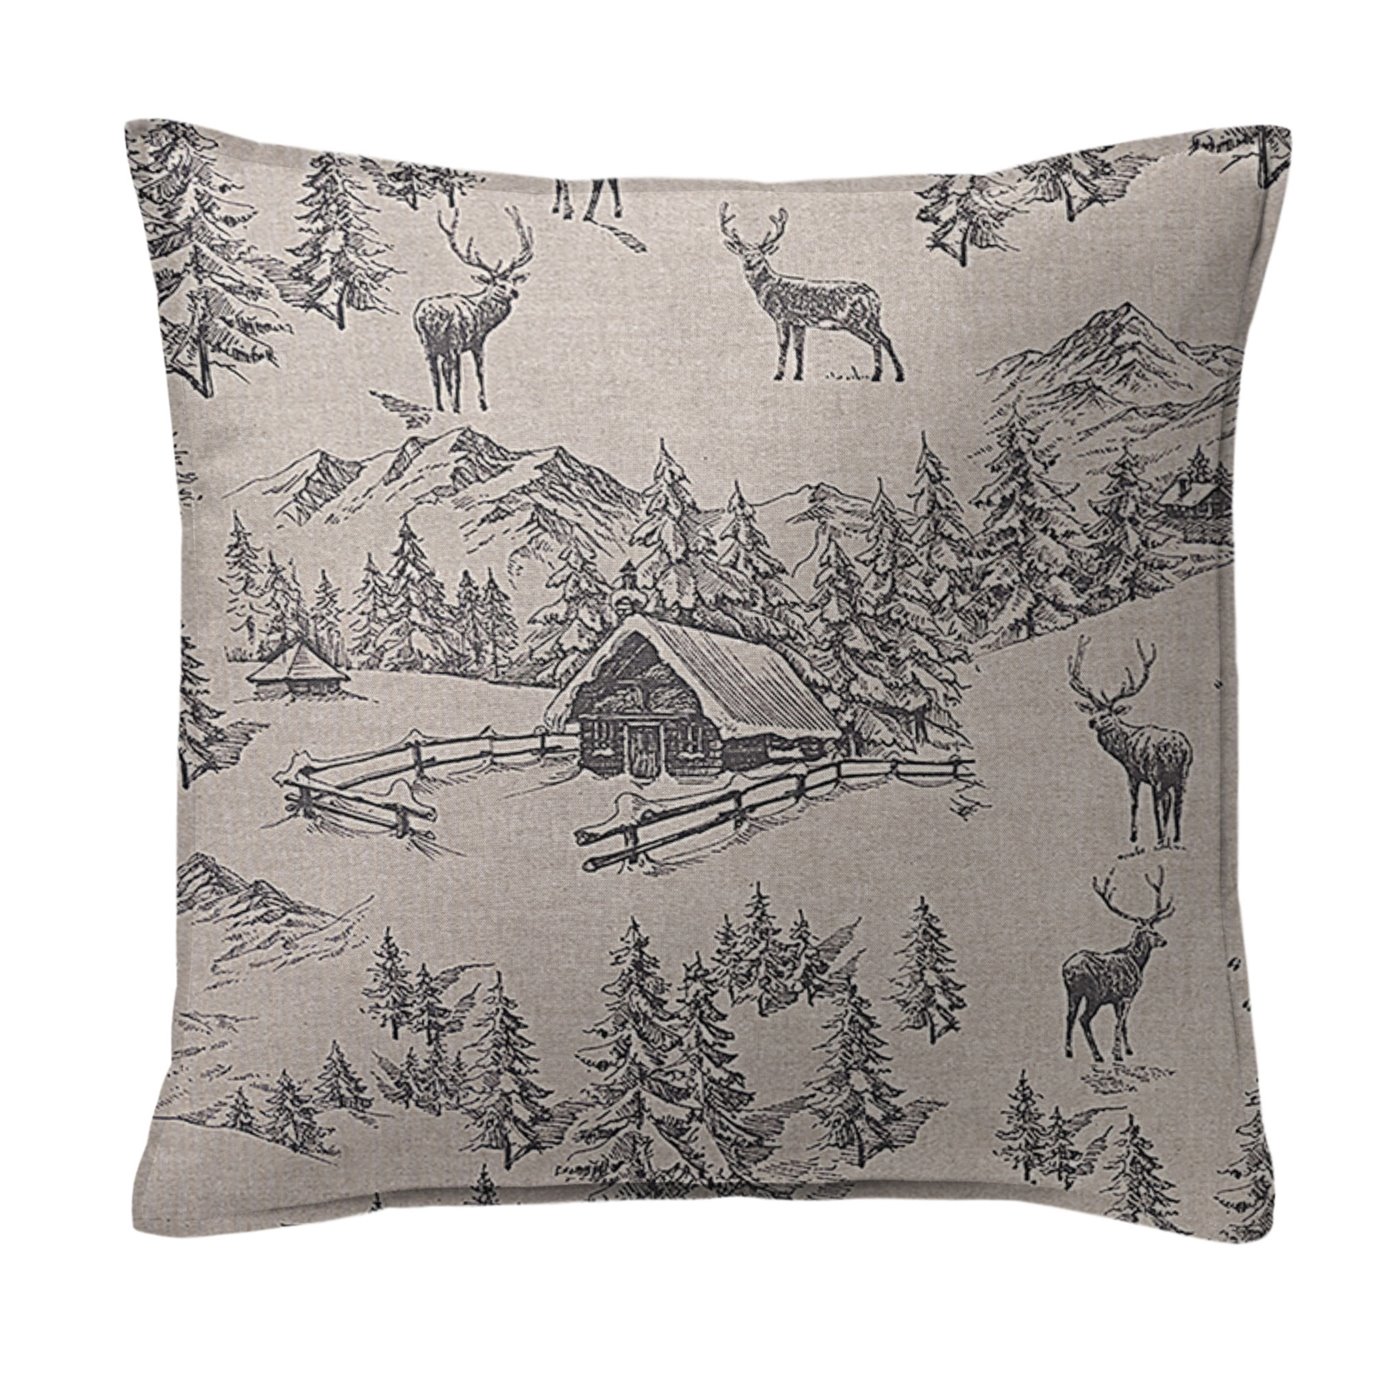 Cross Country Natural Decorative Pillow - Size 24" Square